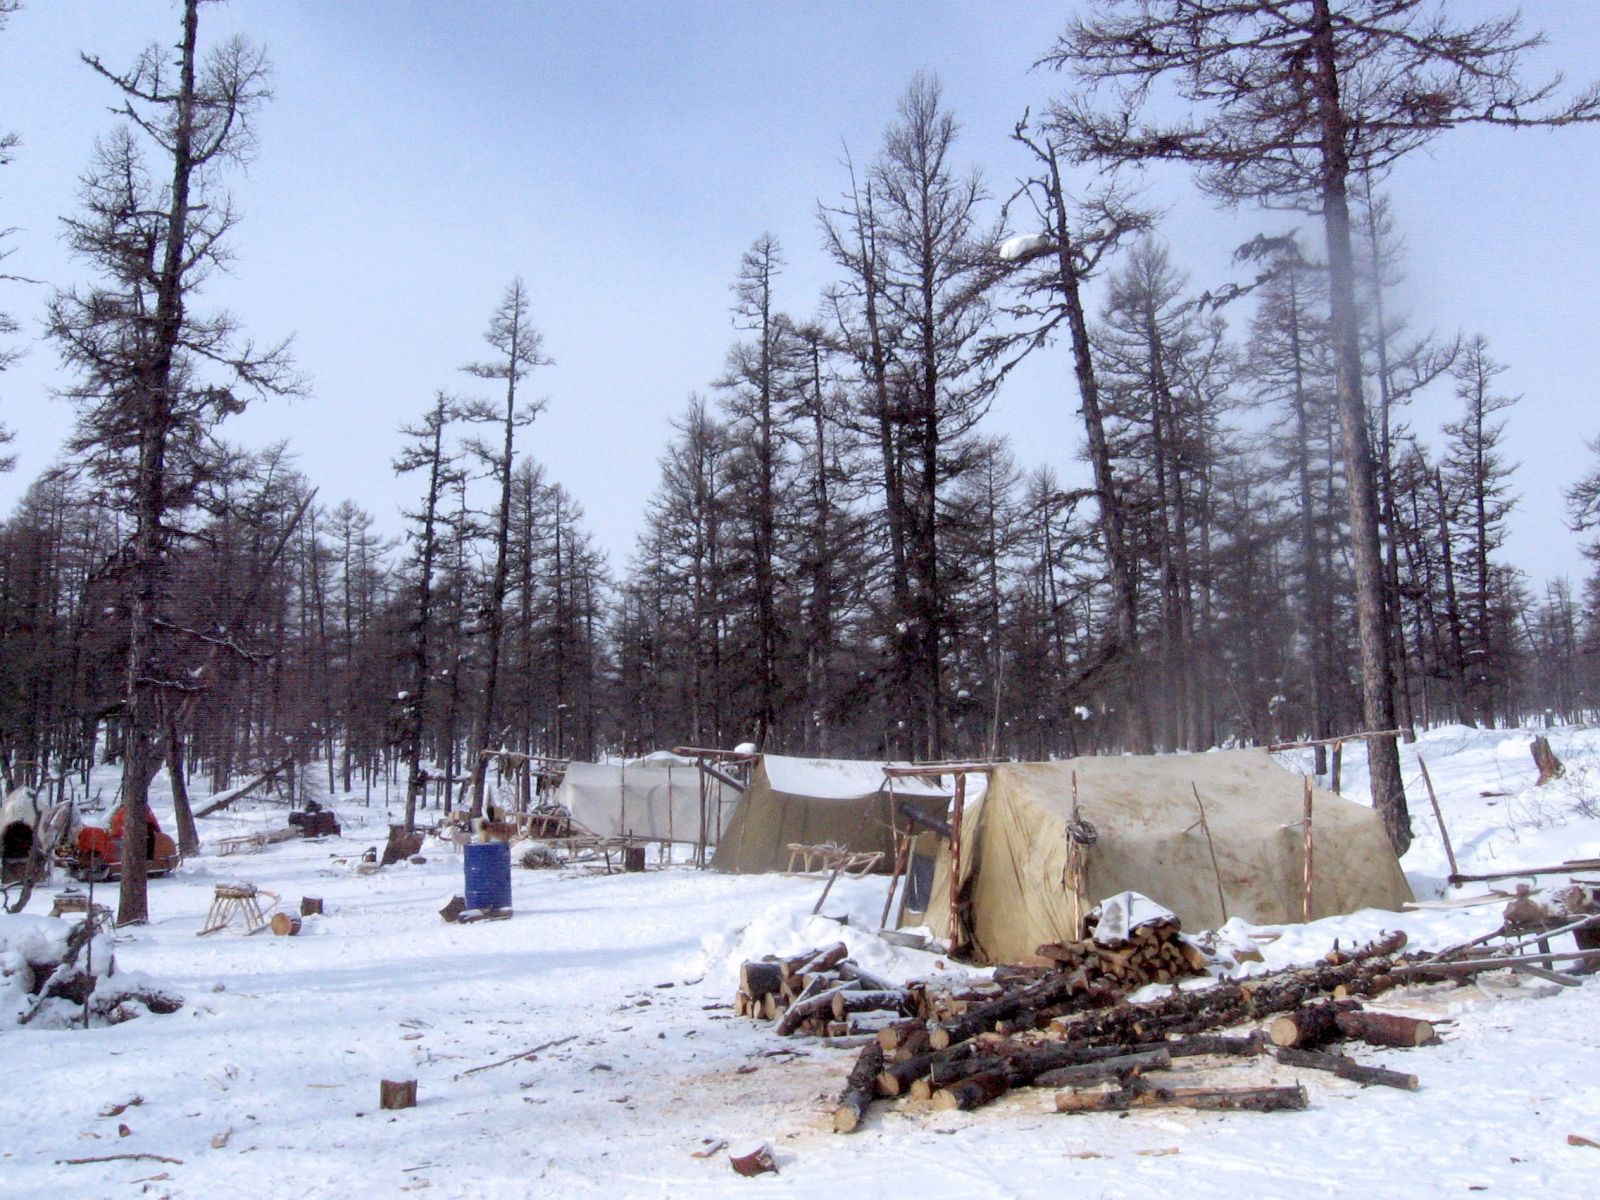 Firewood is being prepared in a spring Evenki camp within the taiga forest. Credit: SnowChange